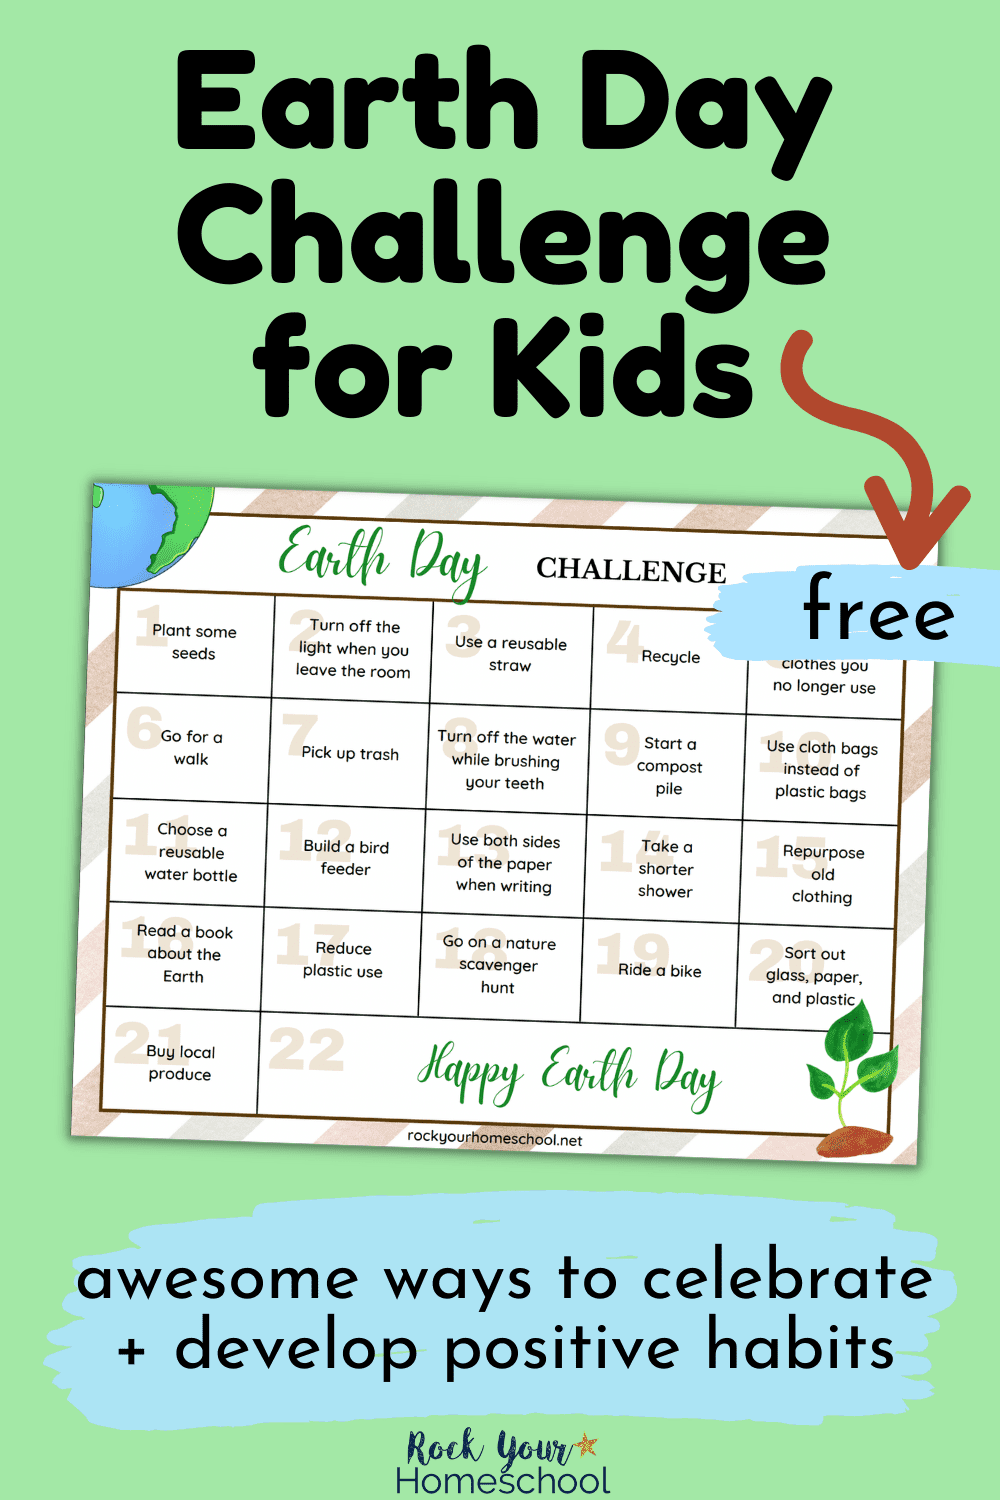 Free Earth Day Challenge for Kids: Creative Way to Make it Fun